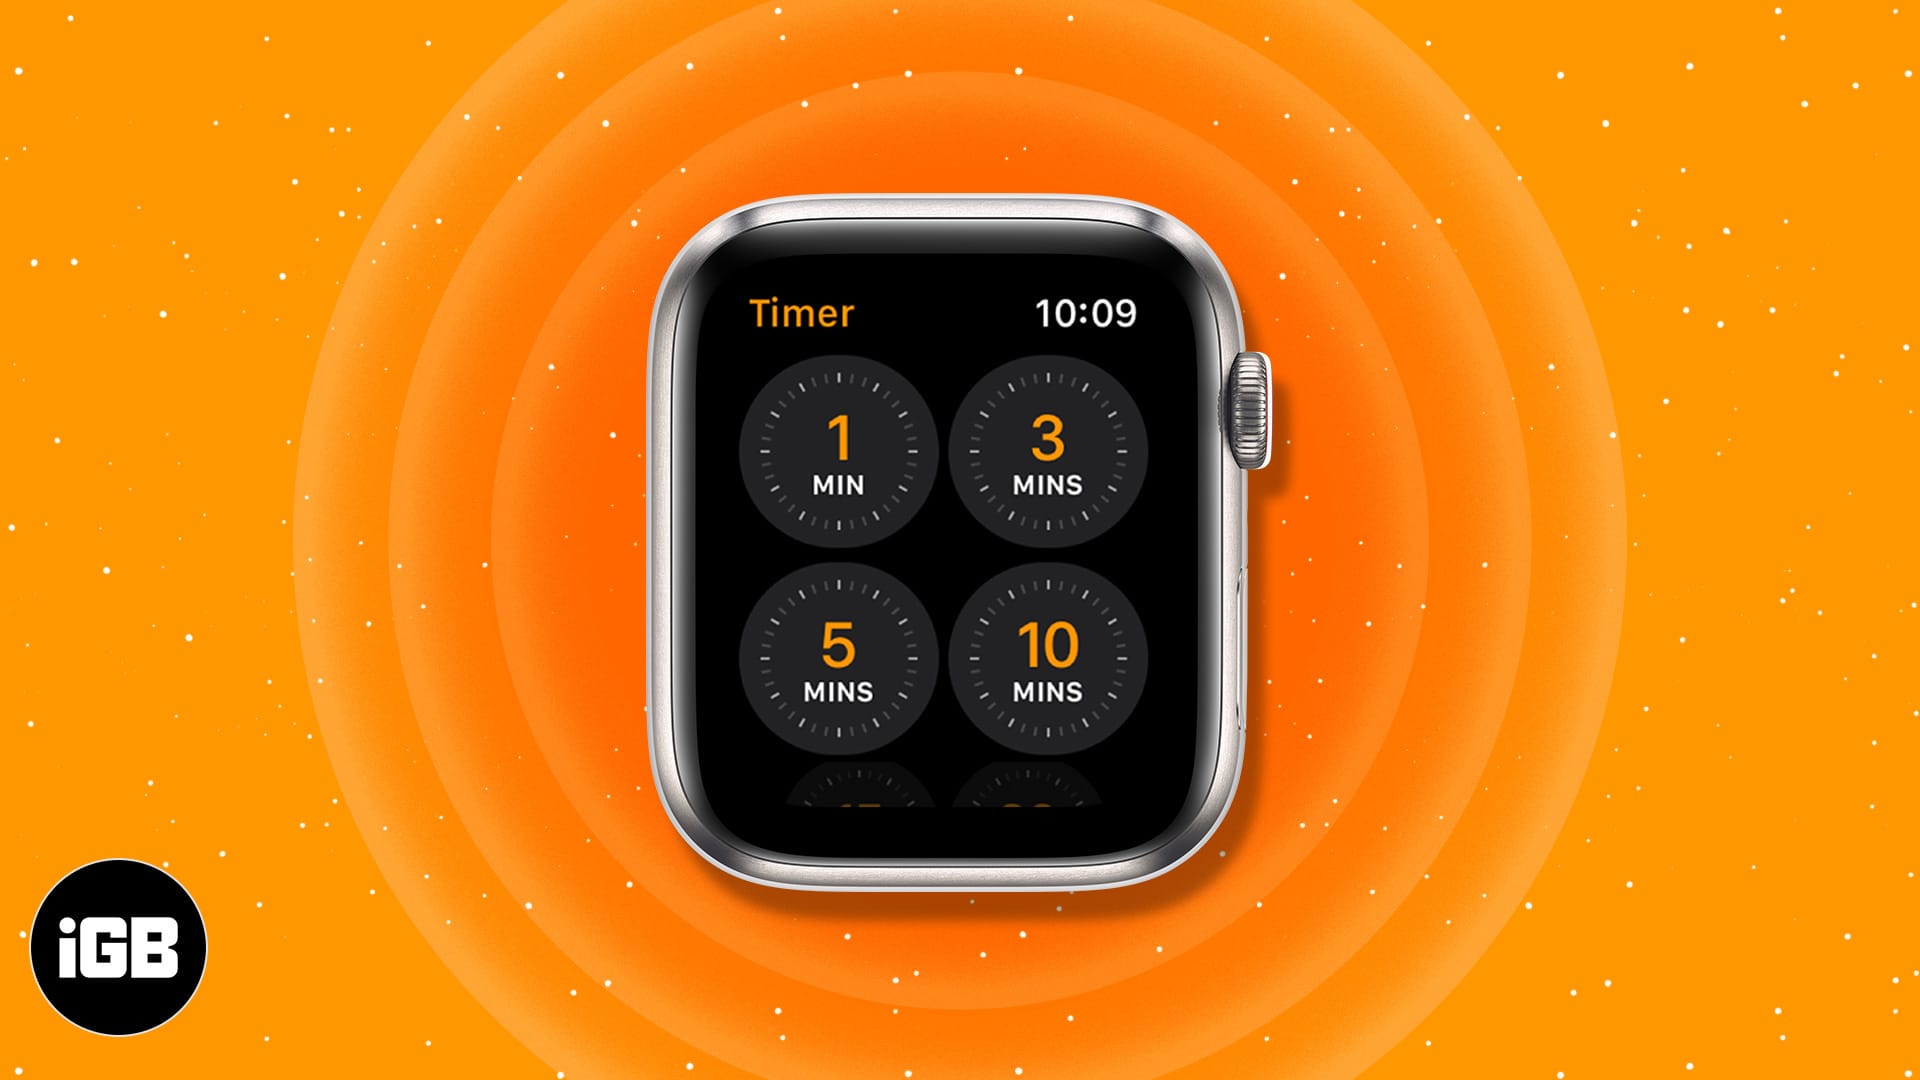 How to set a timer on apple watch